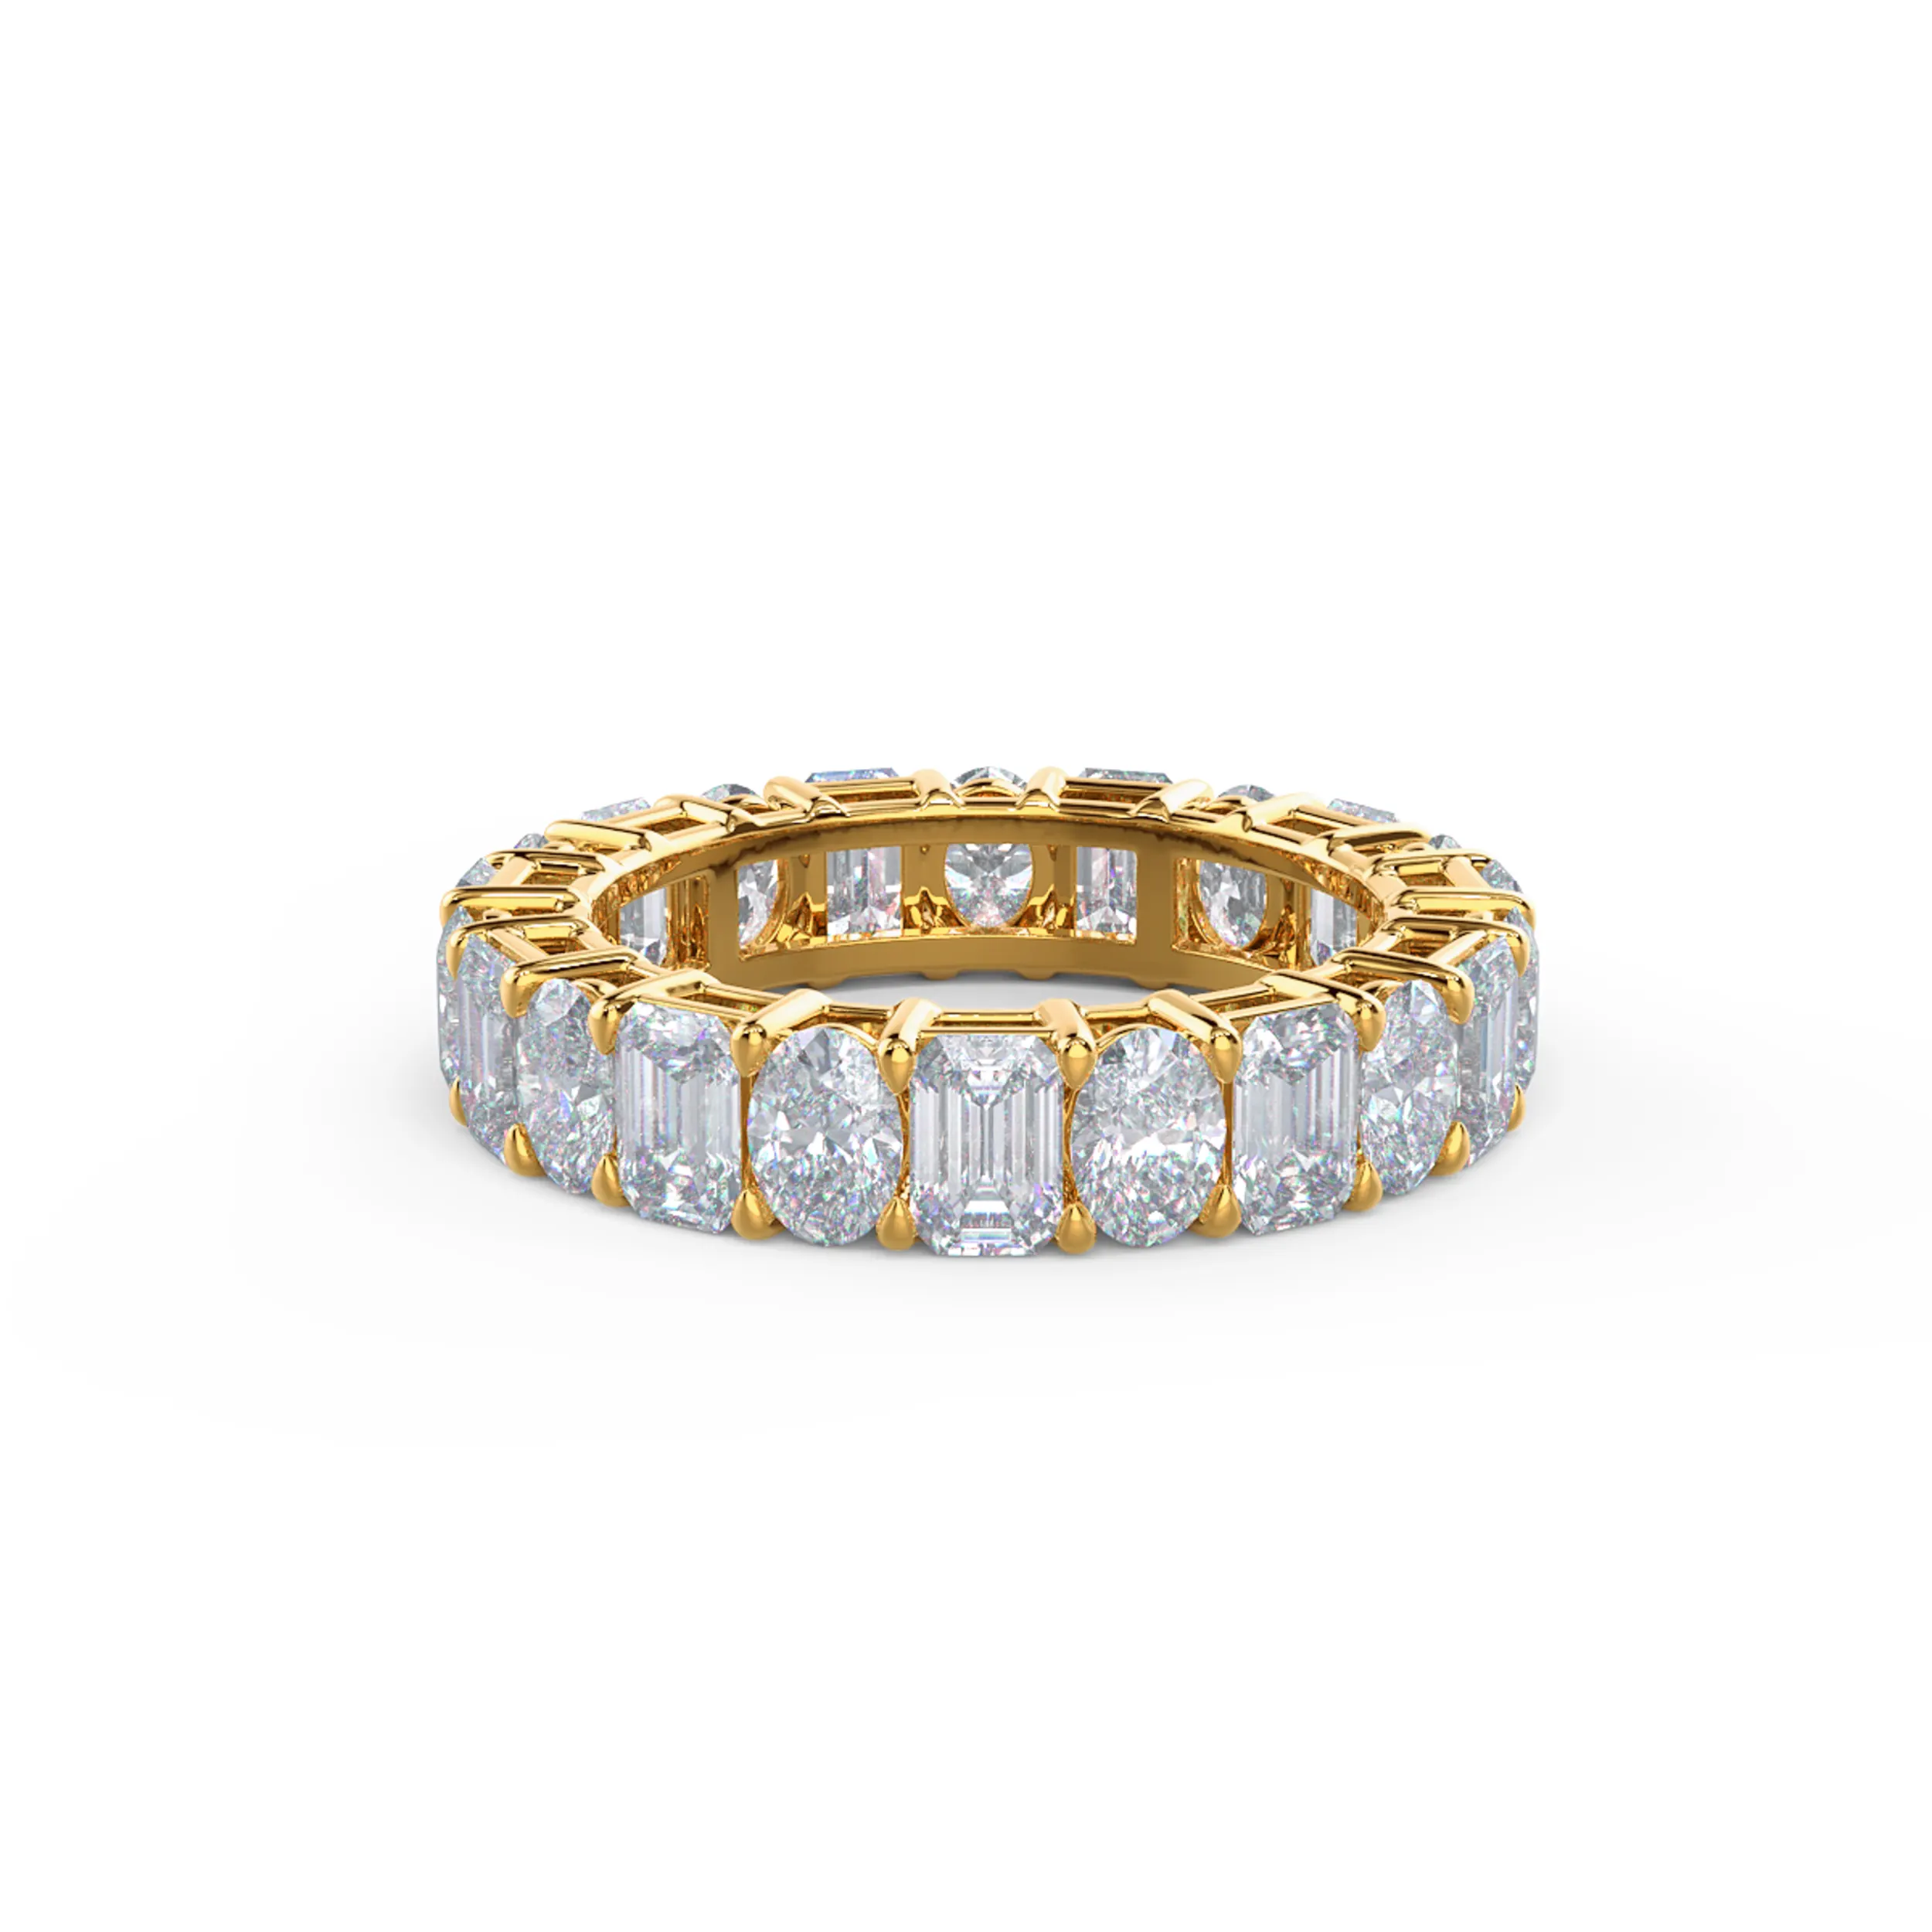 Hand Selected 5.5 Carat Lab Created Diamonds Emerald and Oval Diamond Eternity Band in 14k Yellow Gold (Main View)